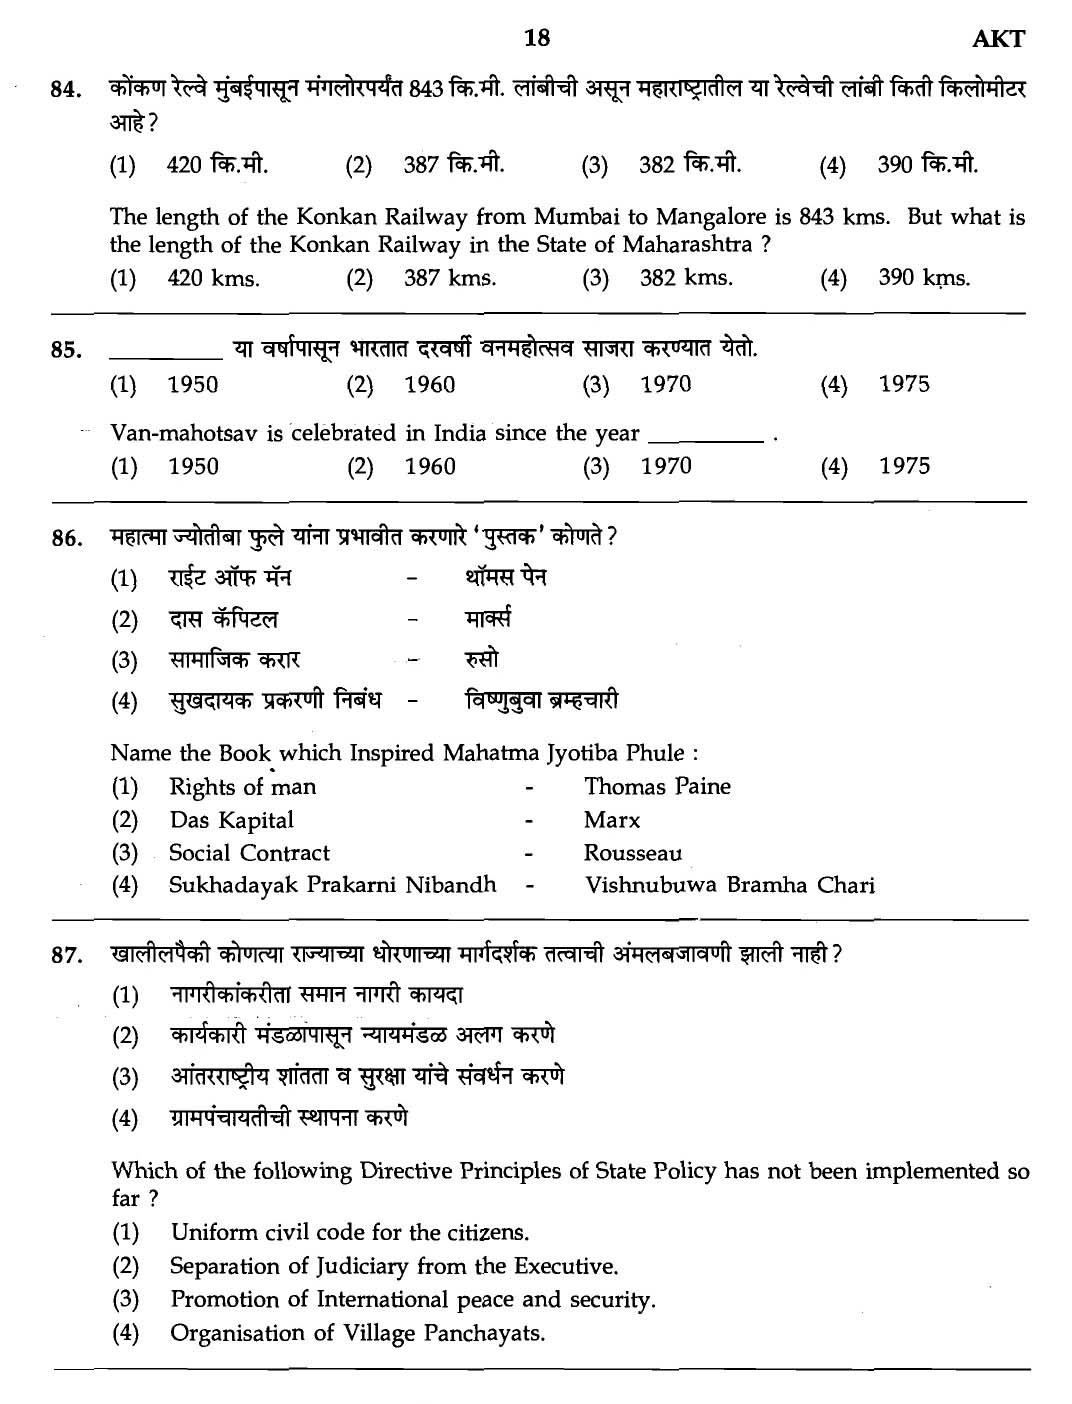 MPSC Agricultural Services Exam 2007 General Question Paper 16